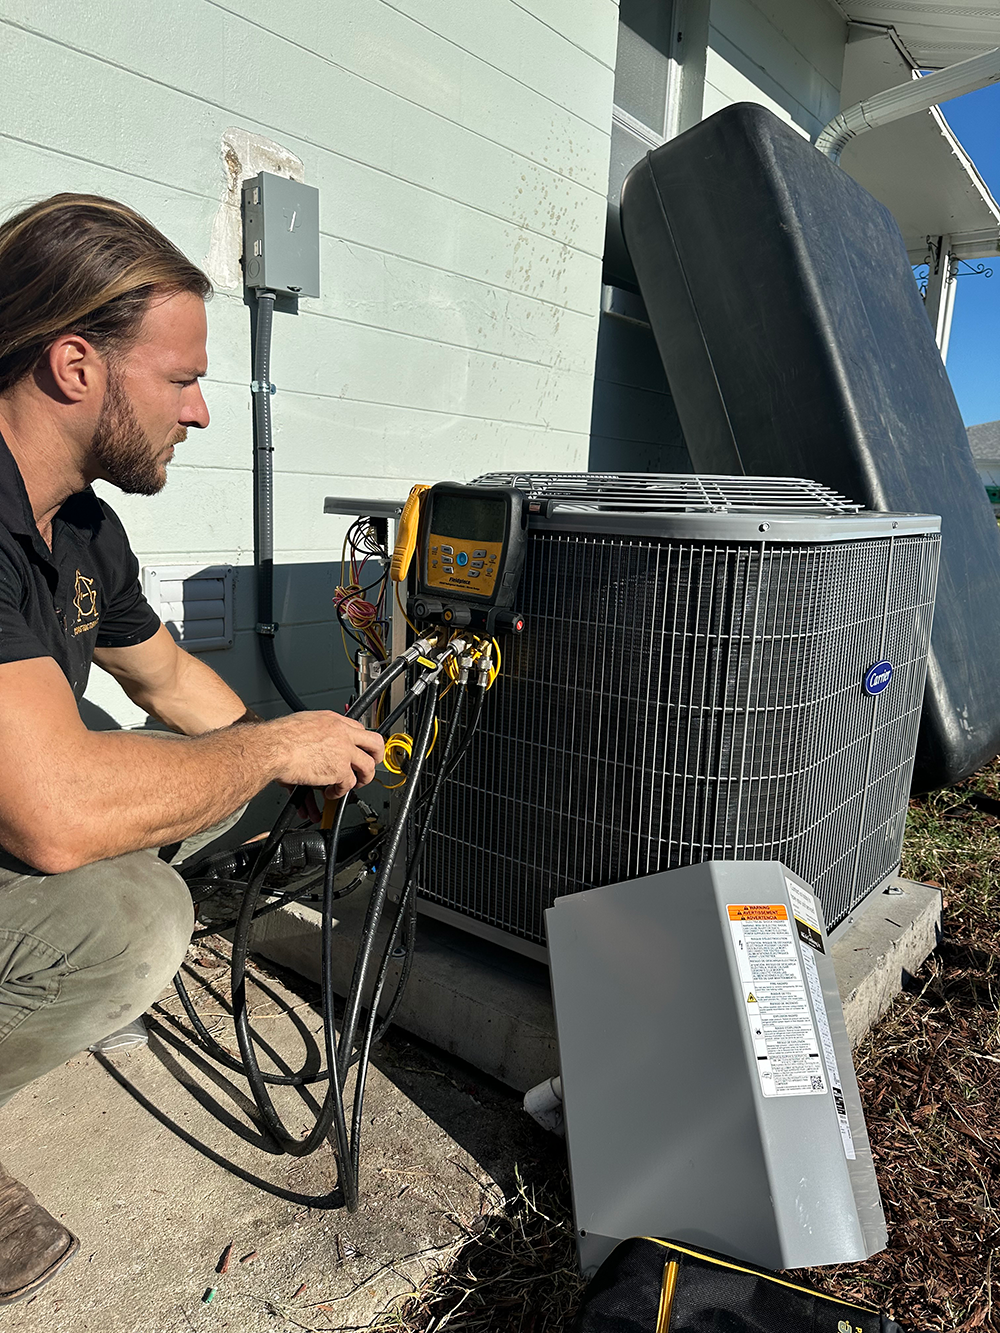 Jimmy, owner of A&G Air Conditioning in Orlando, FL, inspecting a local air conditioning system